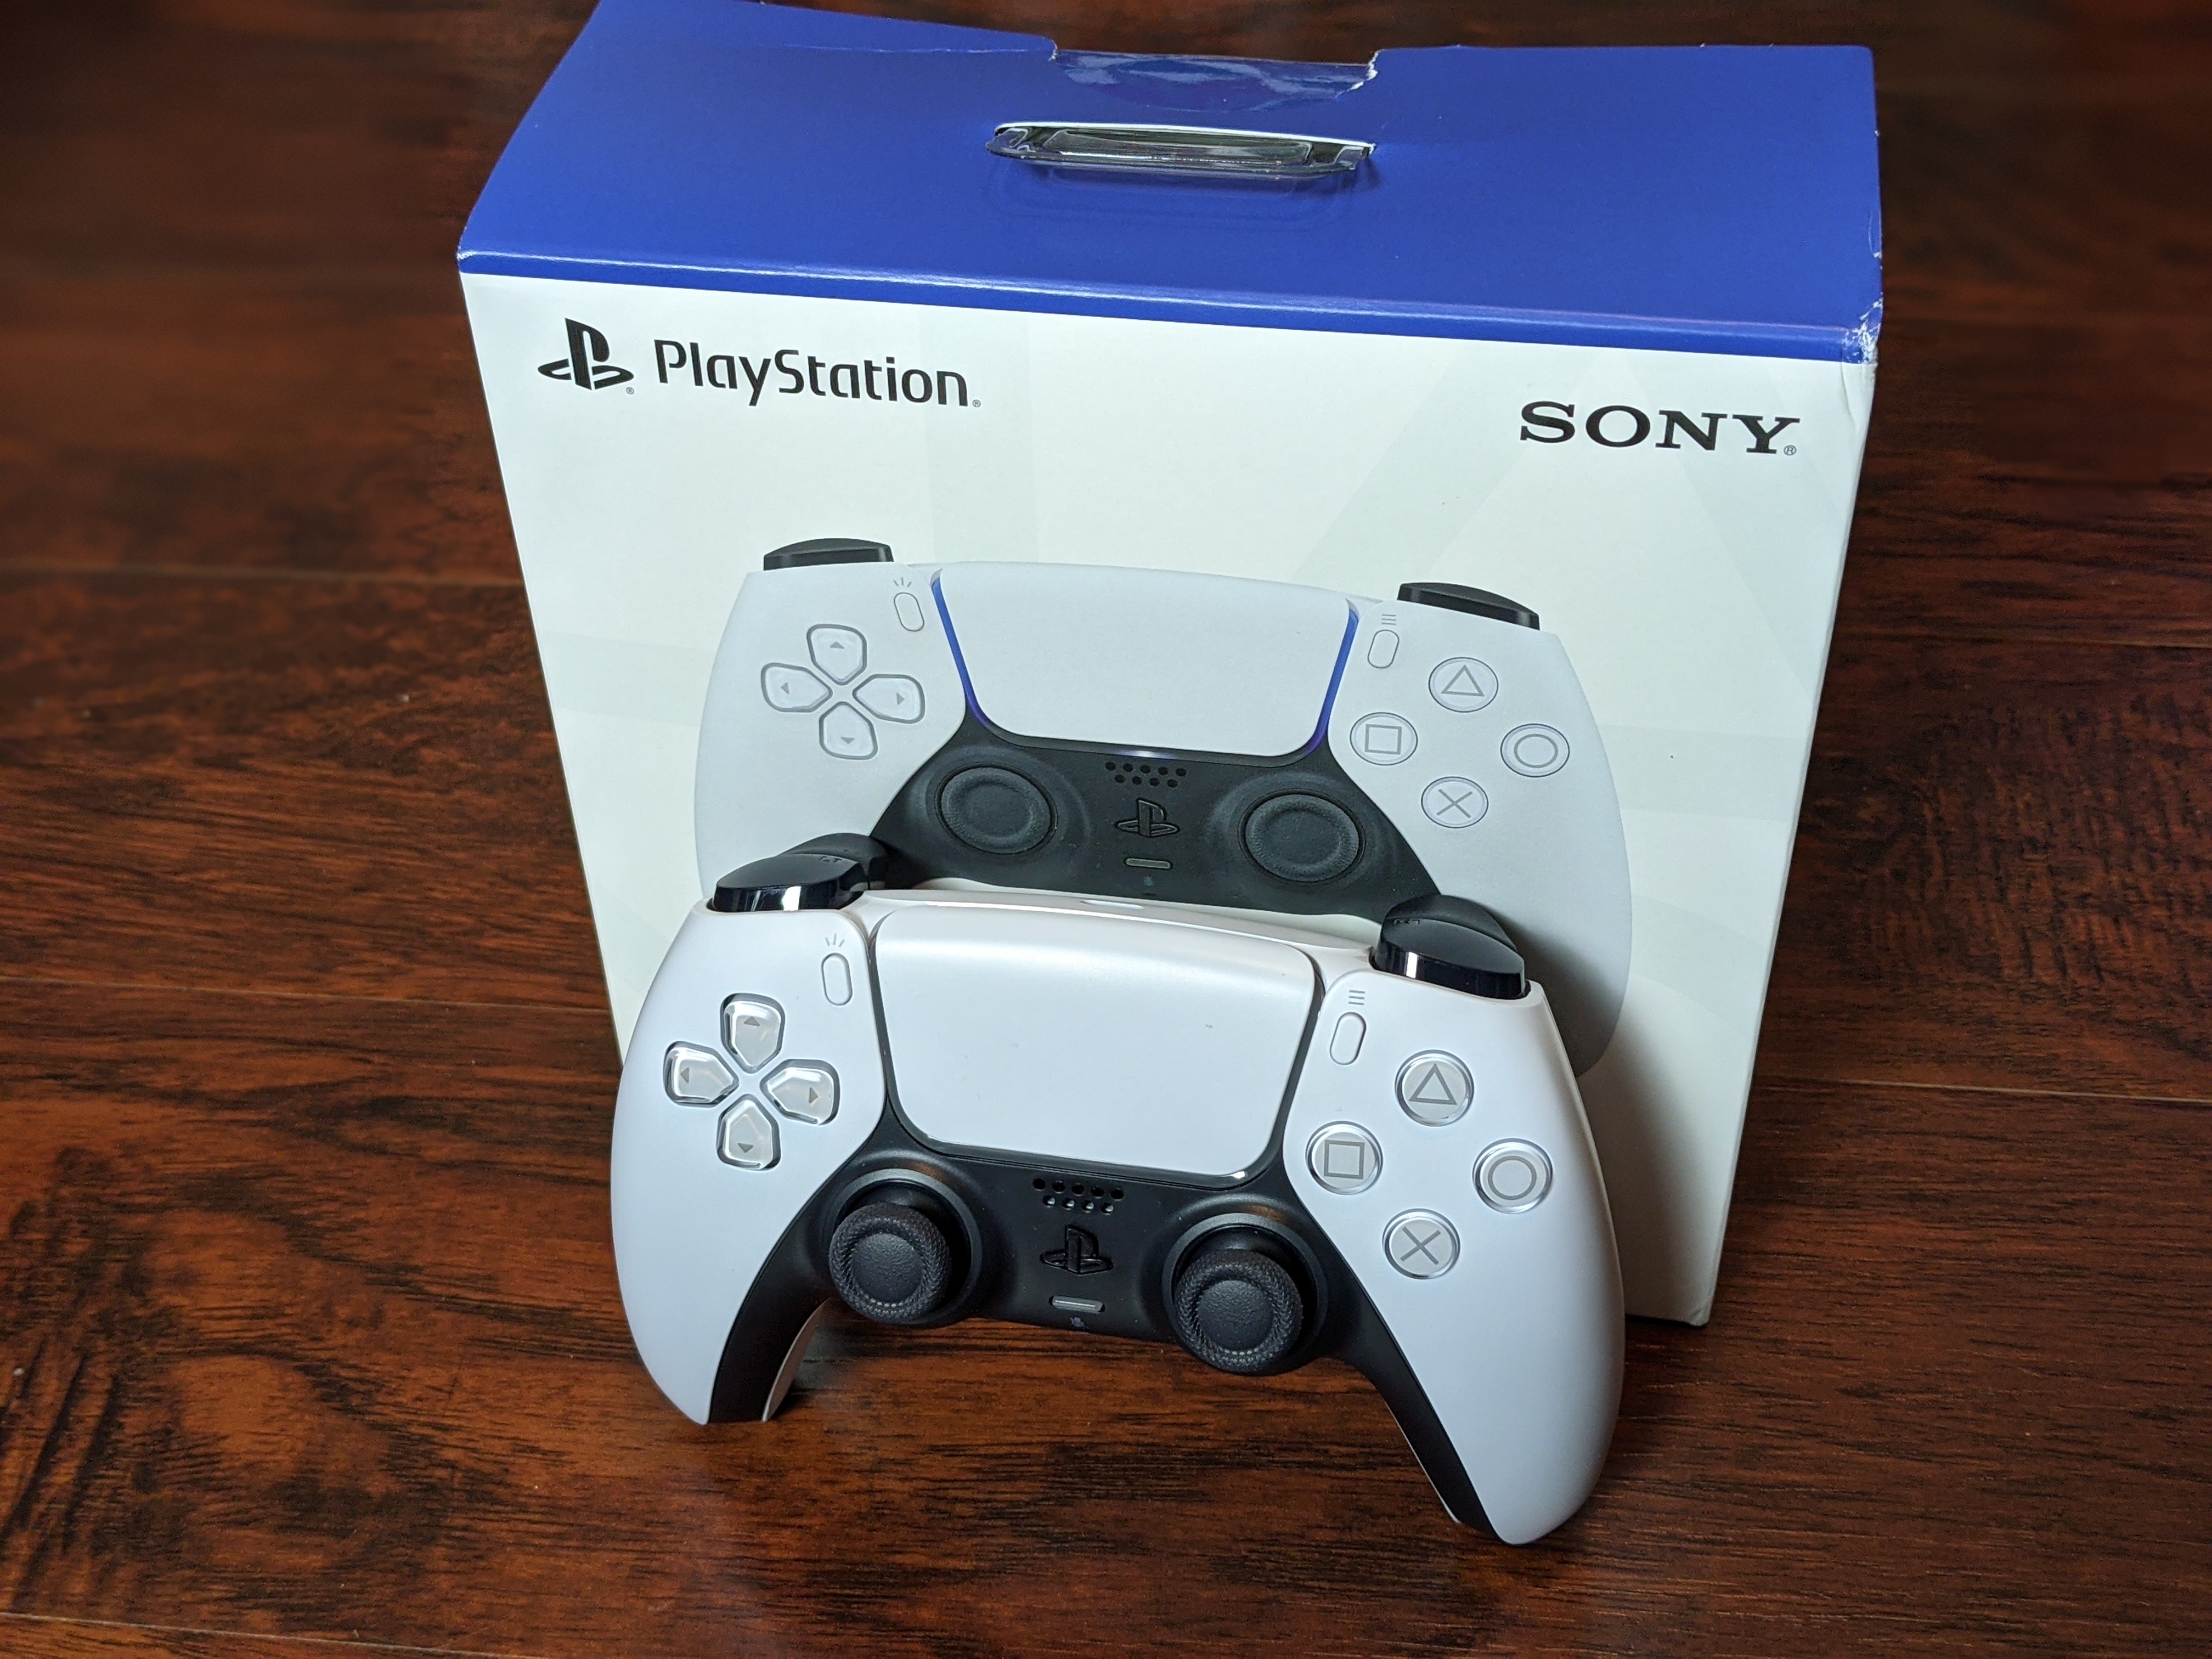 Unboxing the PlayStation 5